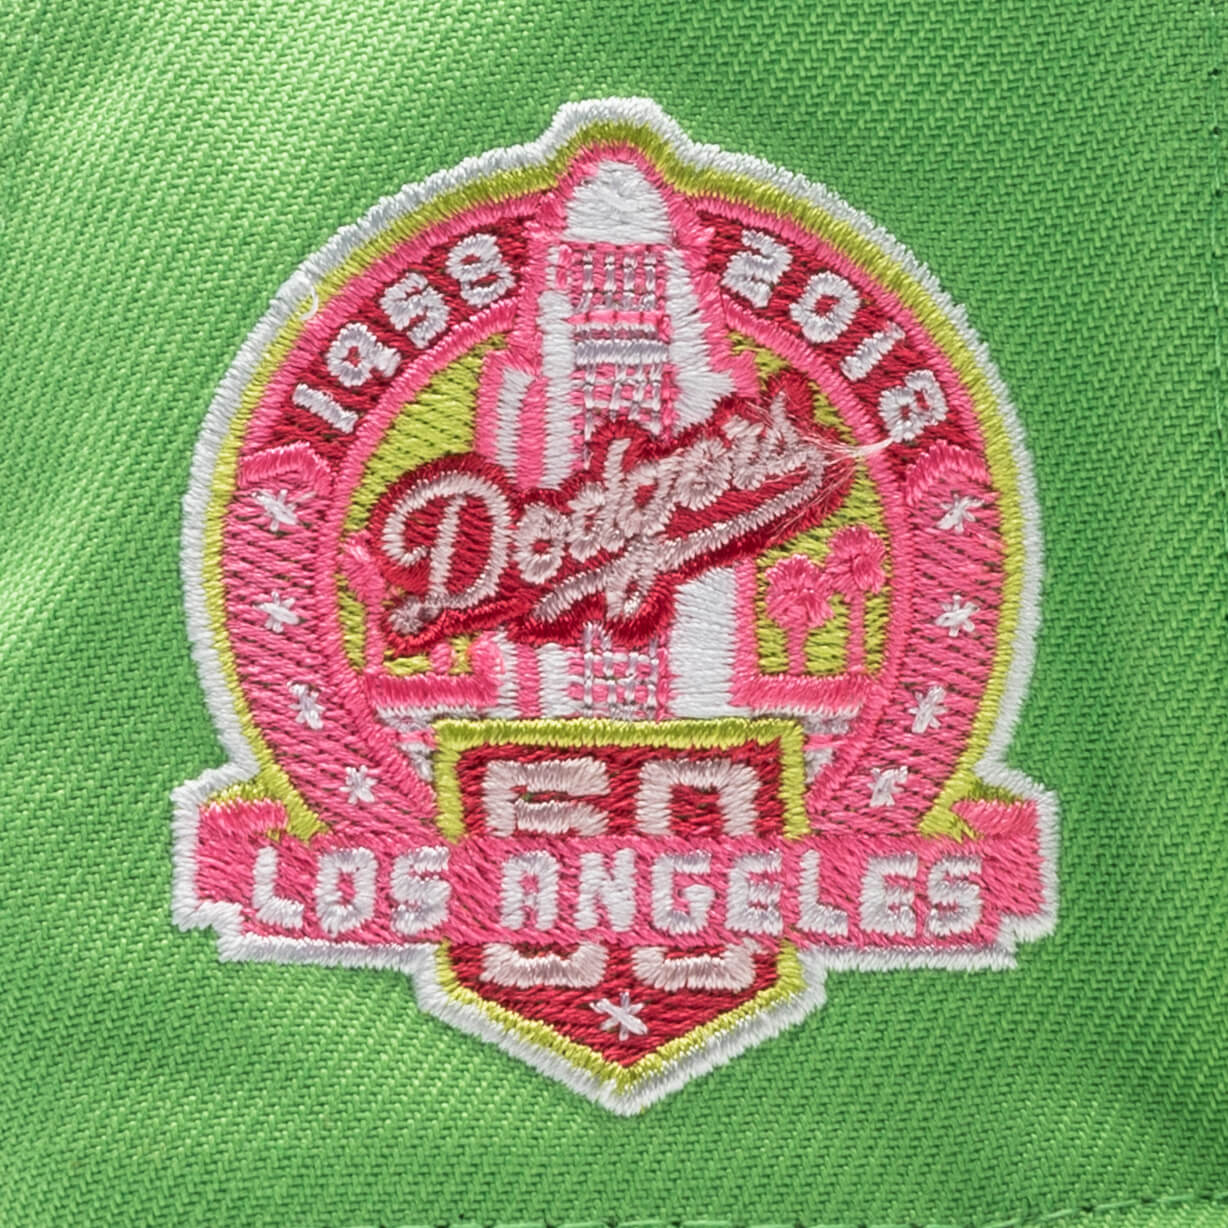 Los Angeles Dodgers Embroidery design files